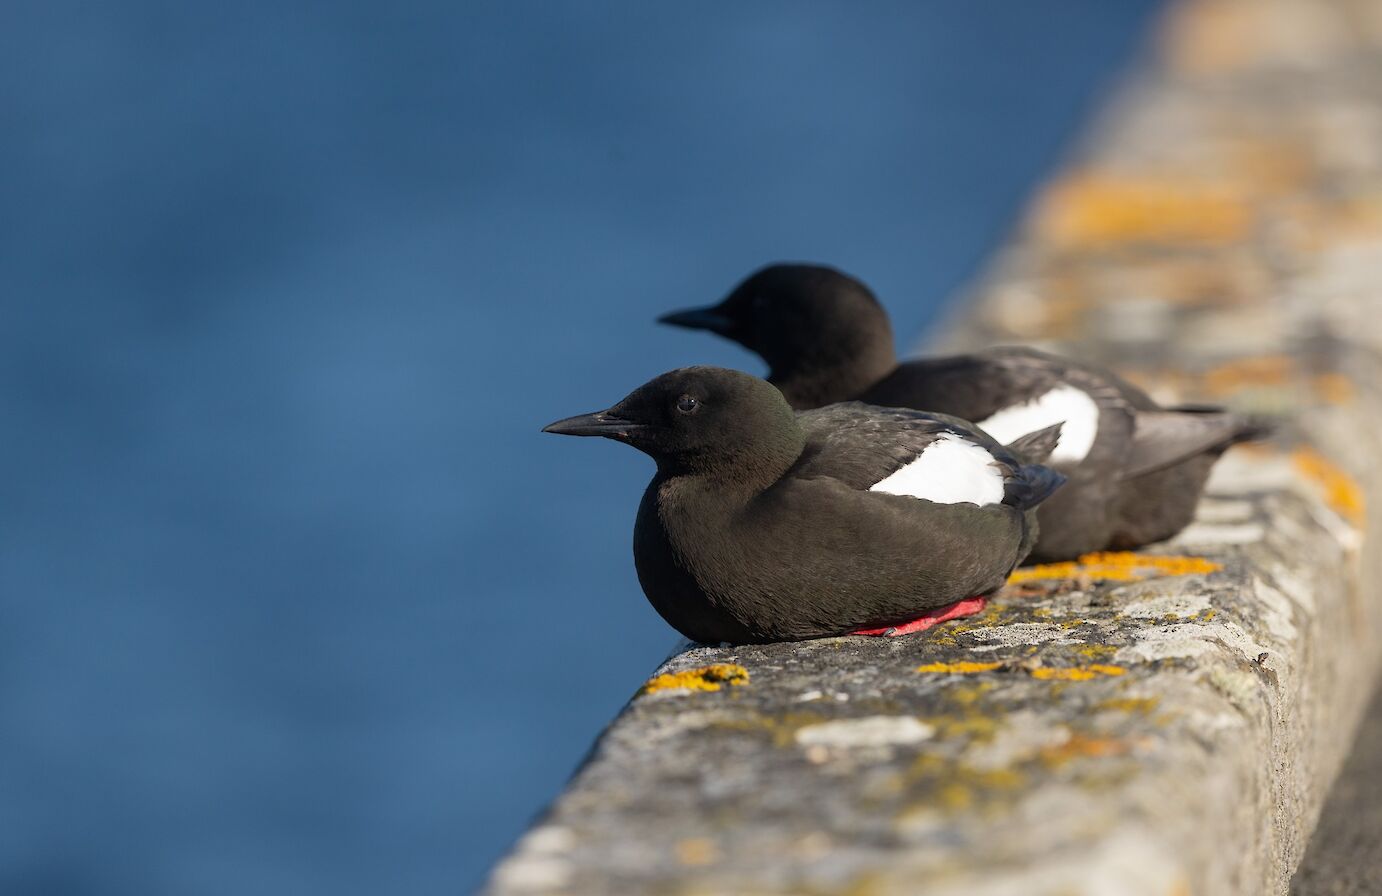 Black guillemots in Stronsay, Orkney - image by Raymond Besant